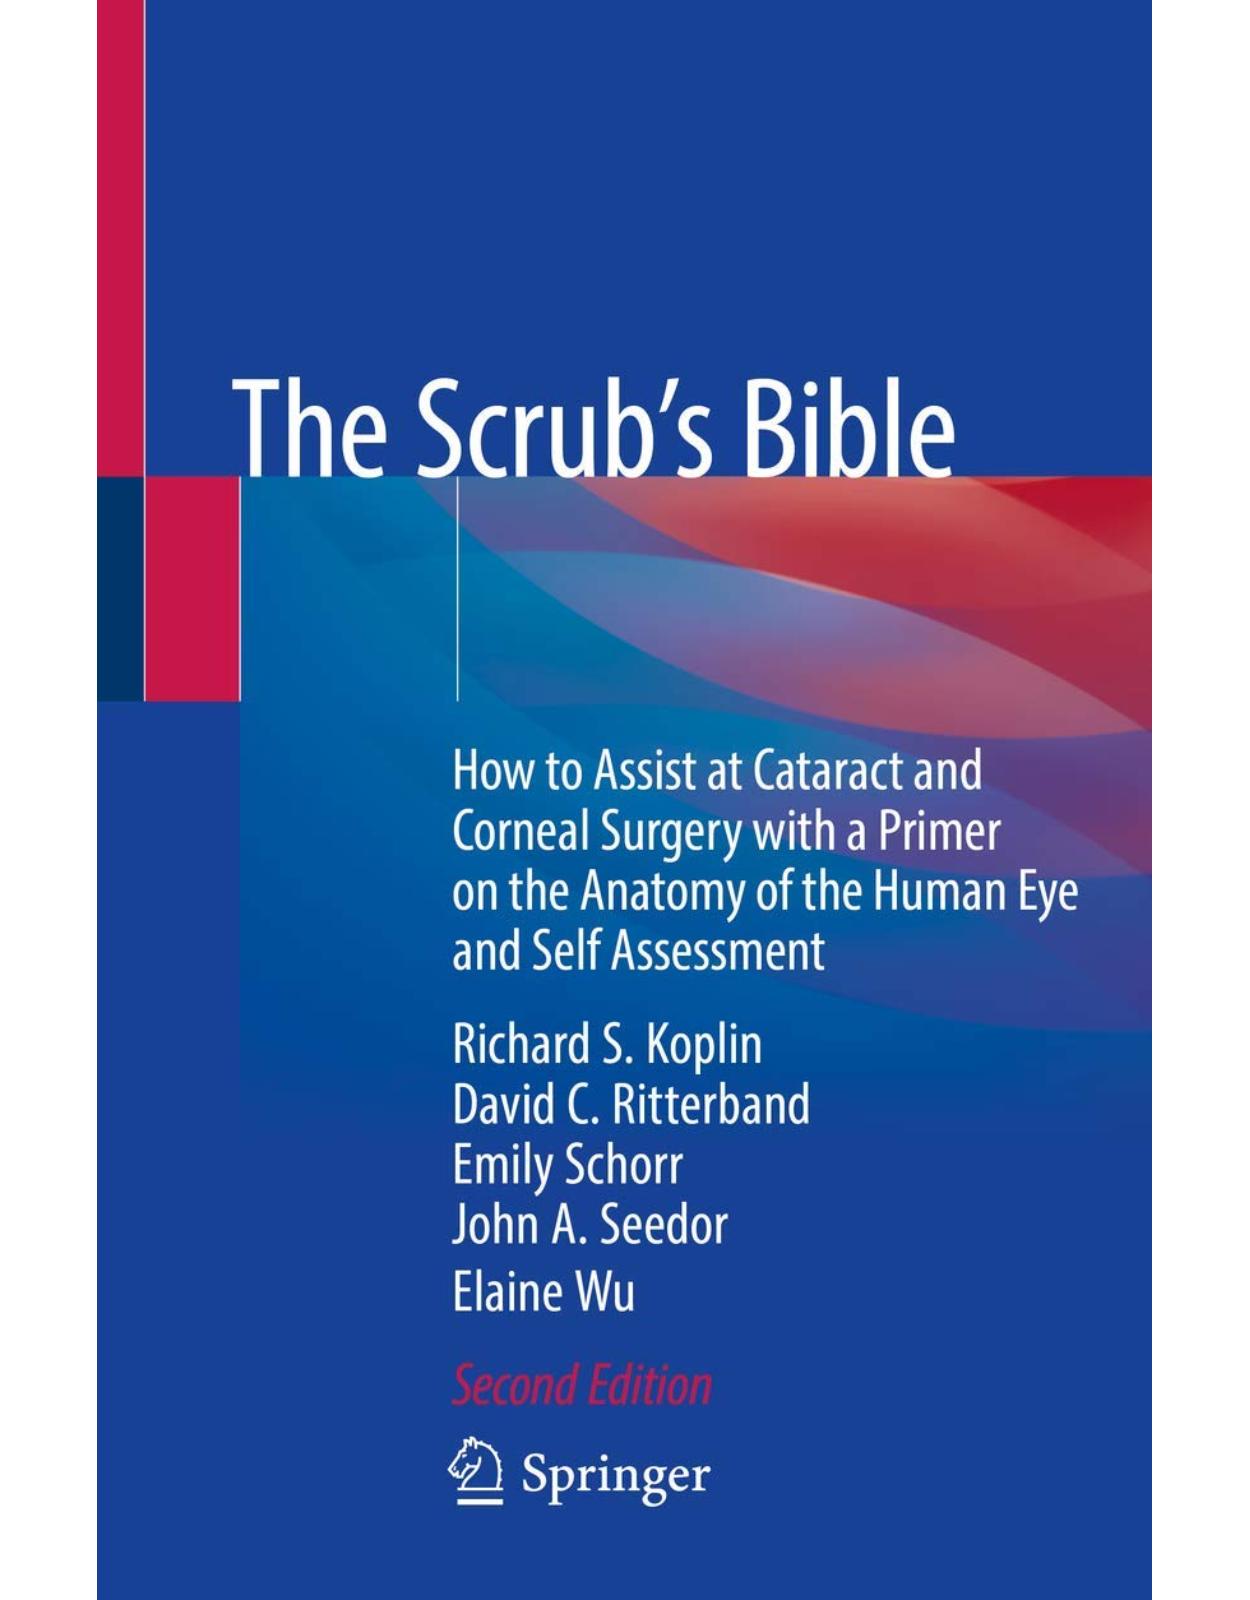 The Scrub's Bible: How to Assist at Cataract and Corneal Surgery with a Primer on the Anatomy of the Human Eye and Self Assessment 